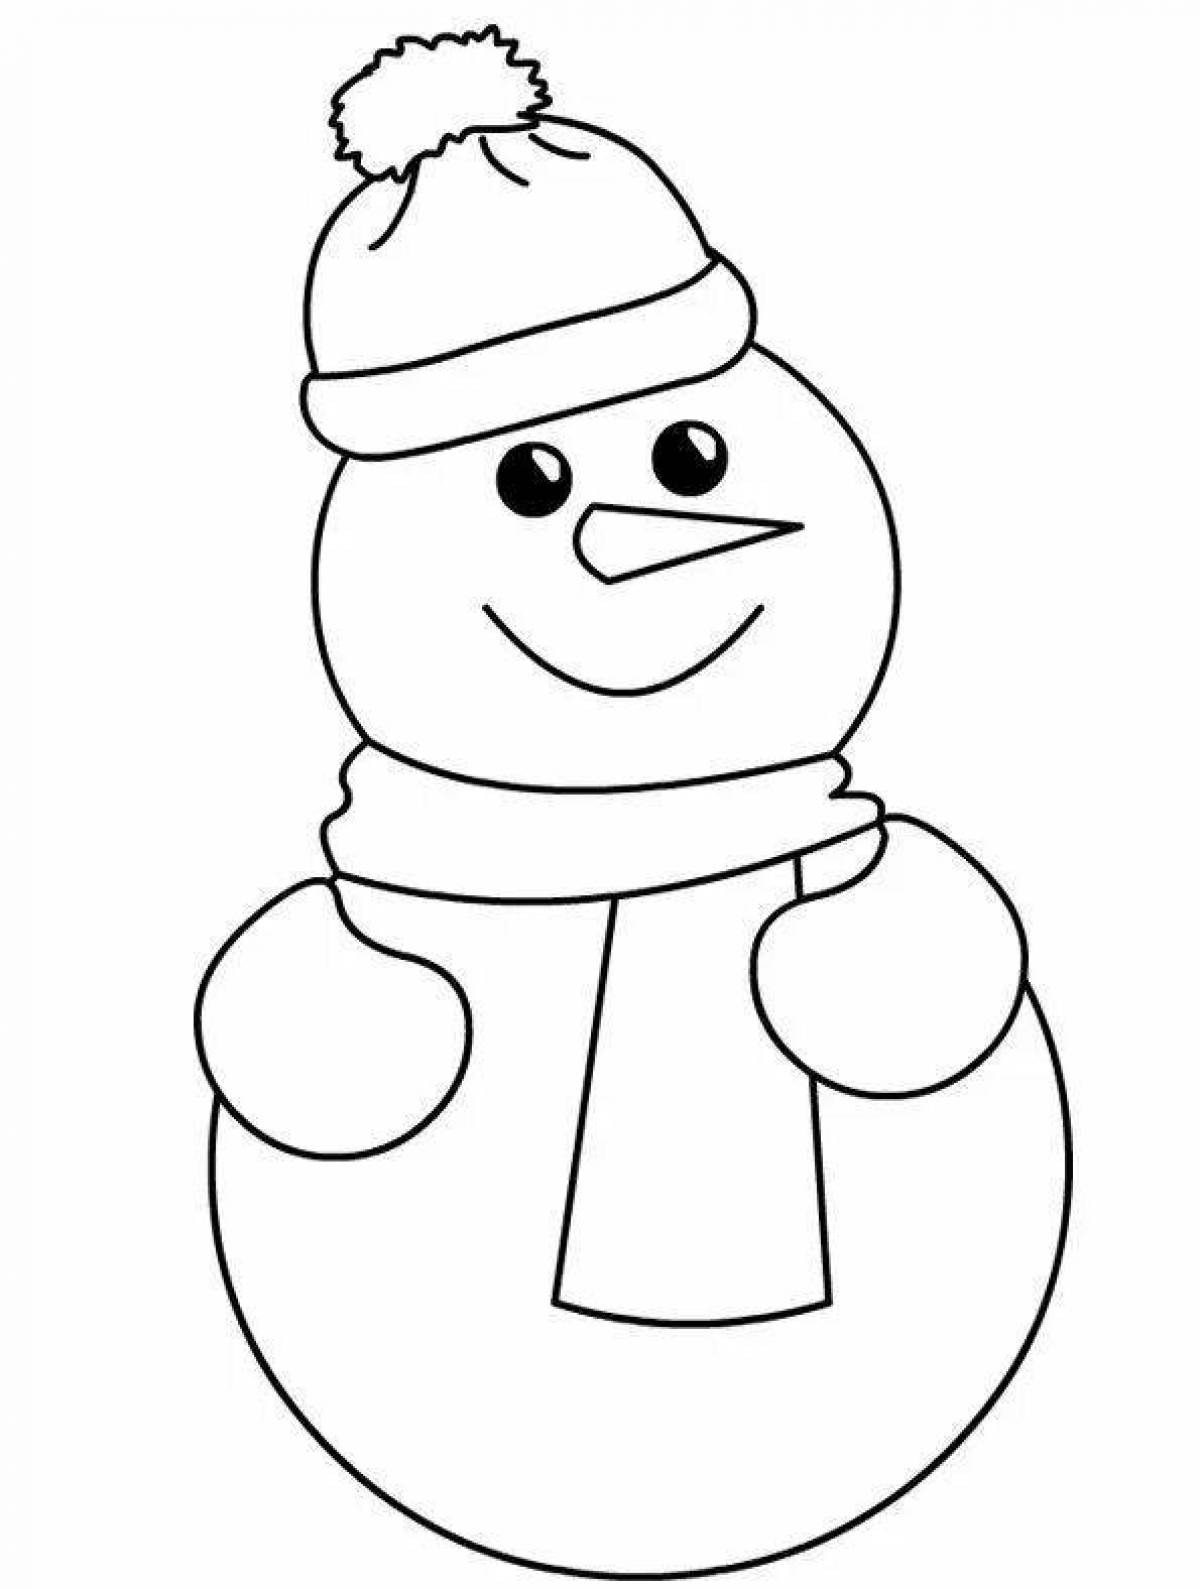 Animated snowman coloring book in color